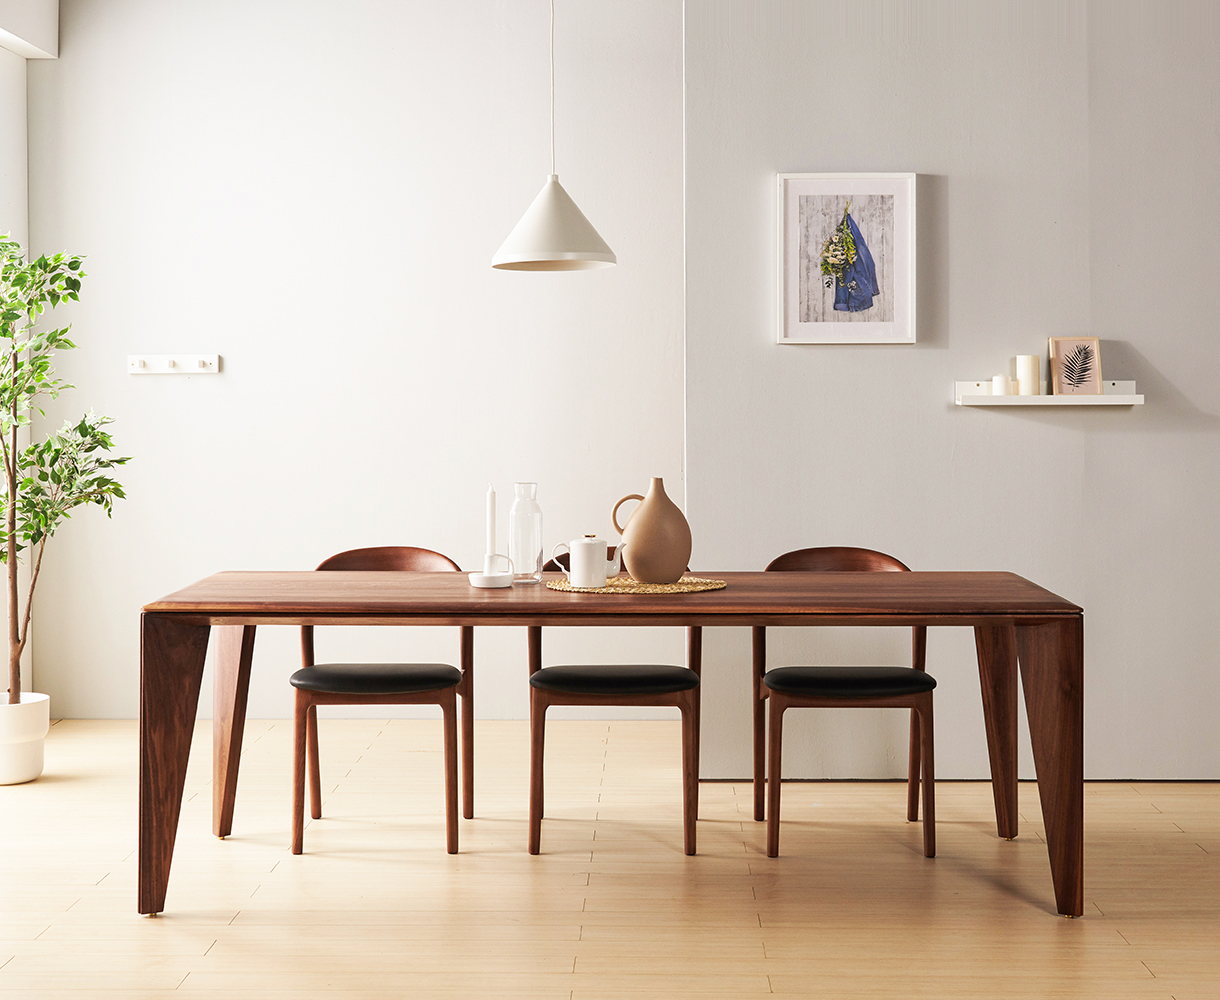 <p style="text-align:left; font-size:16px; margin-top:26px;">Judd Table<br><span style="color:#666;">₩ 3,840,000</span></p>